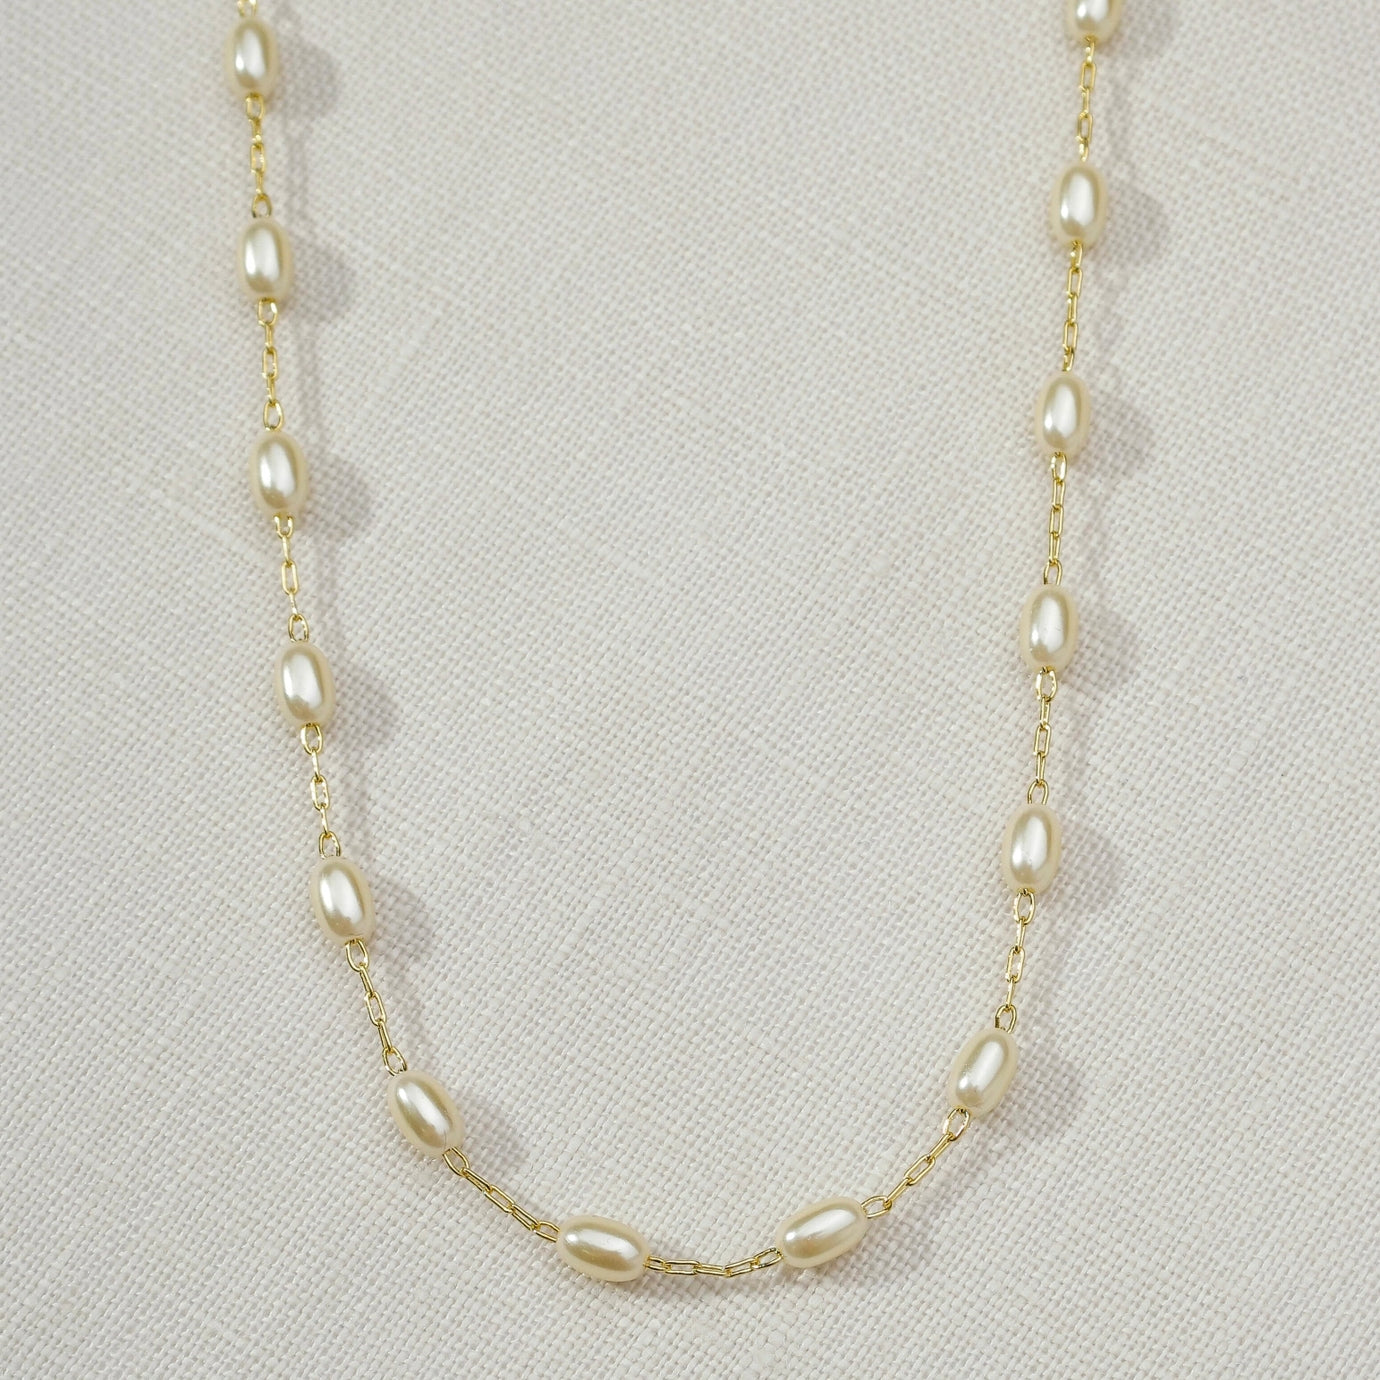 Oval Pearl Necklace, 18k Gold Filled